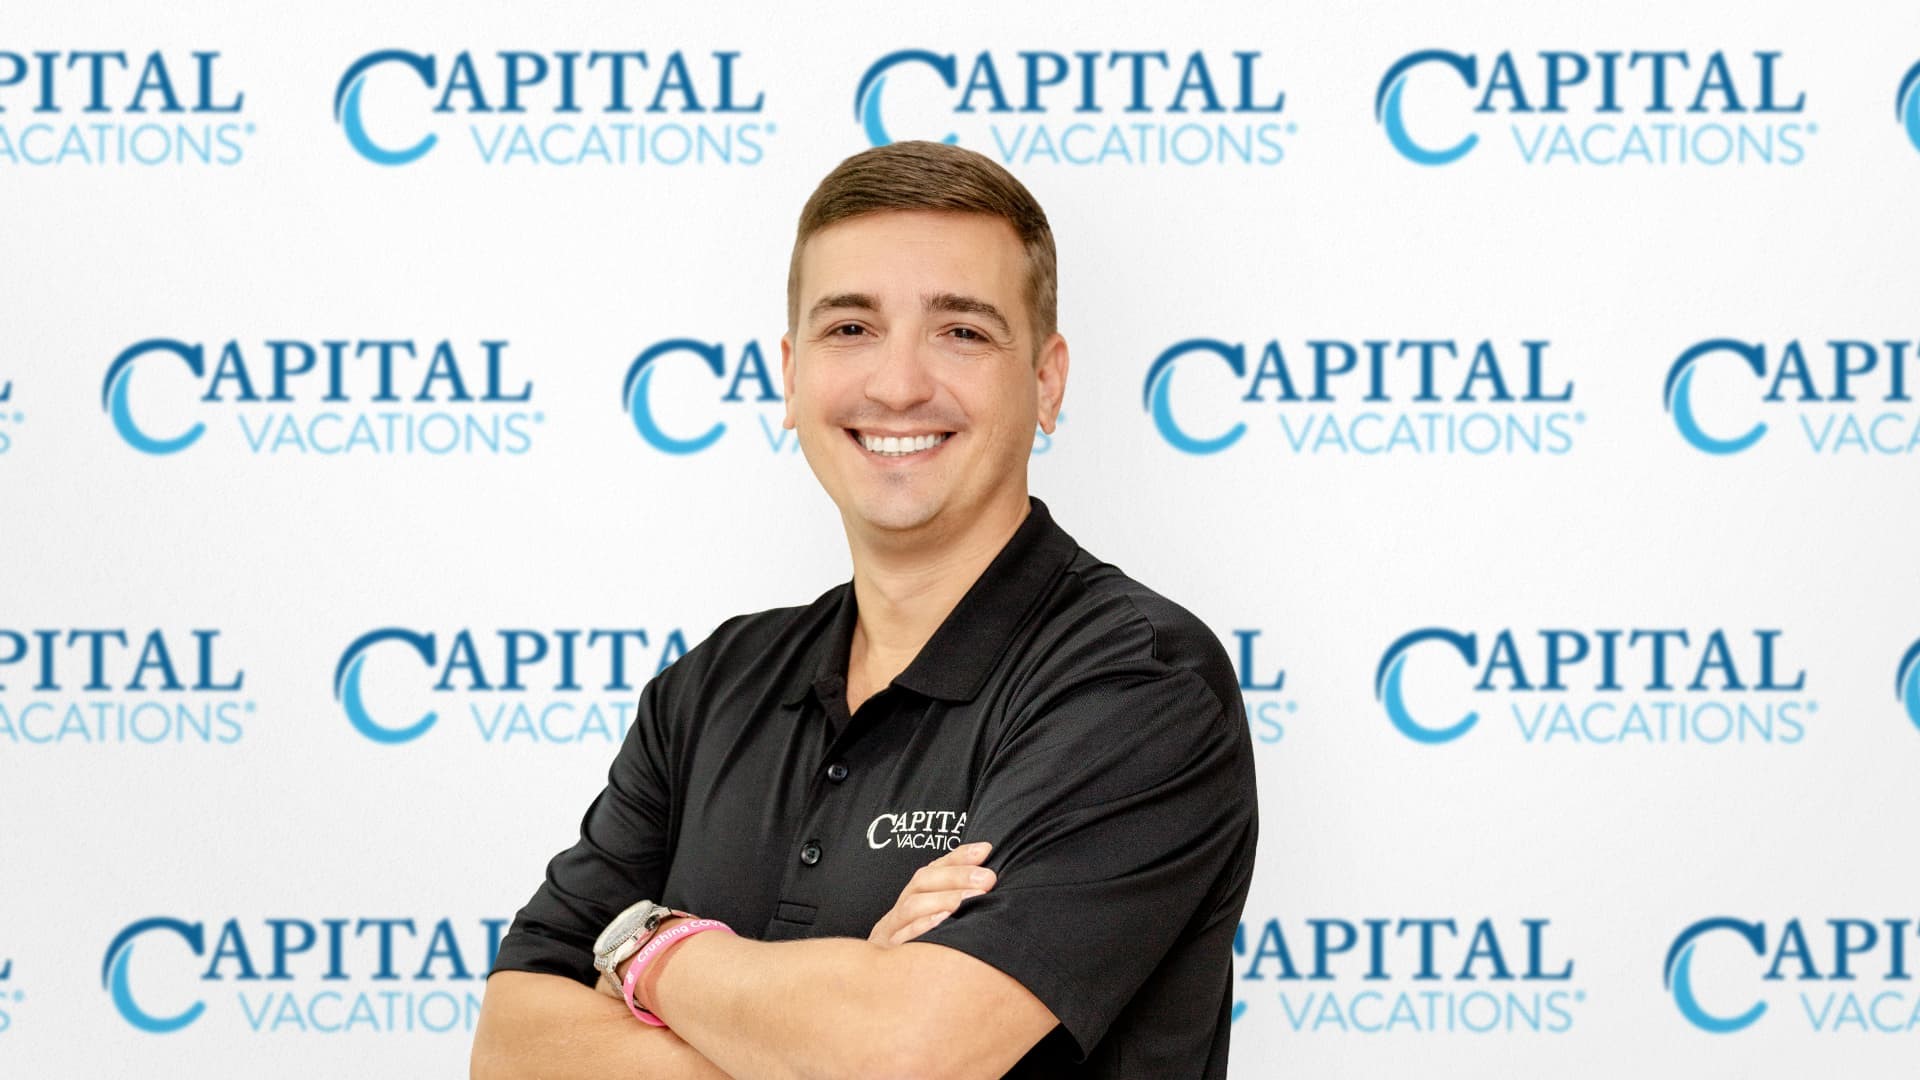 Capital Vacations appoints Mike Federico Chief Financial Officer